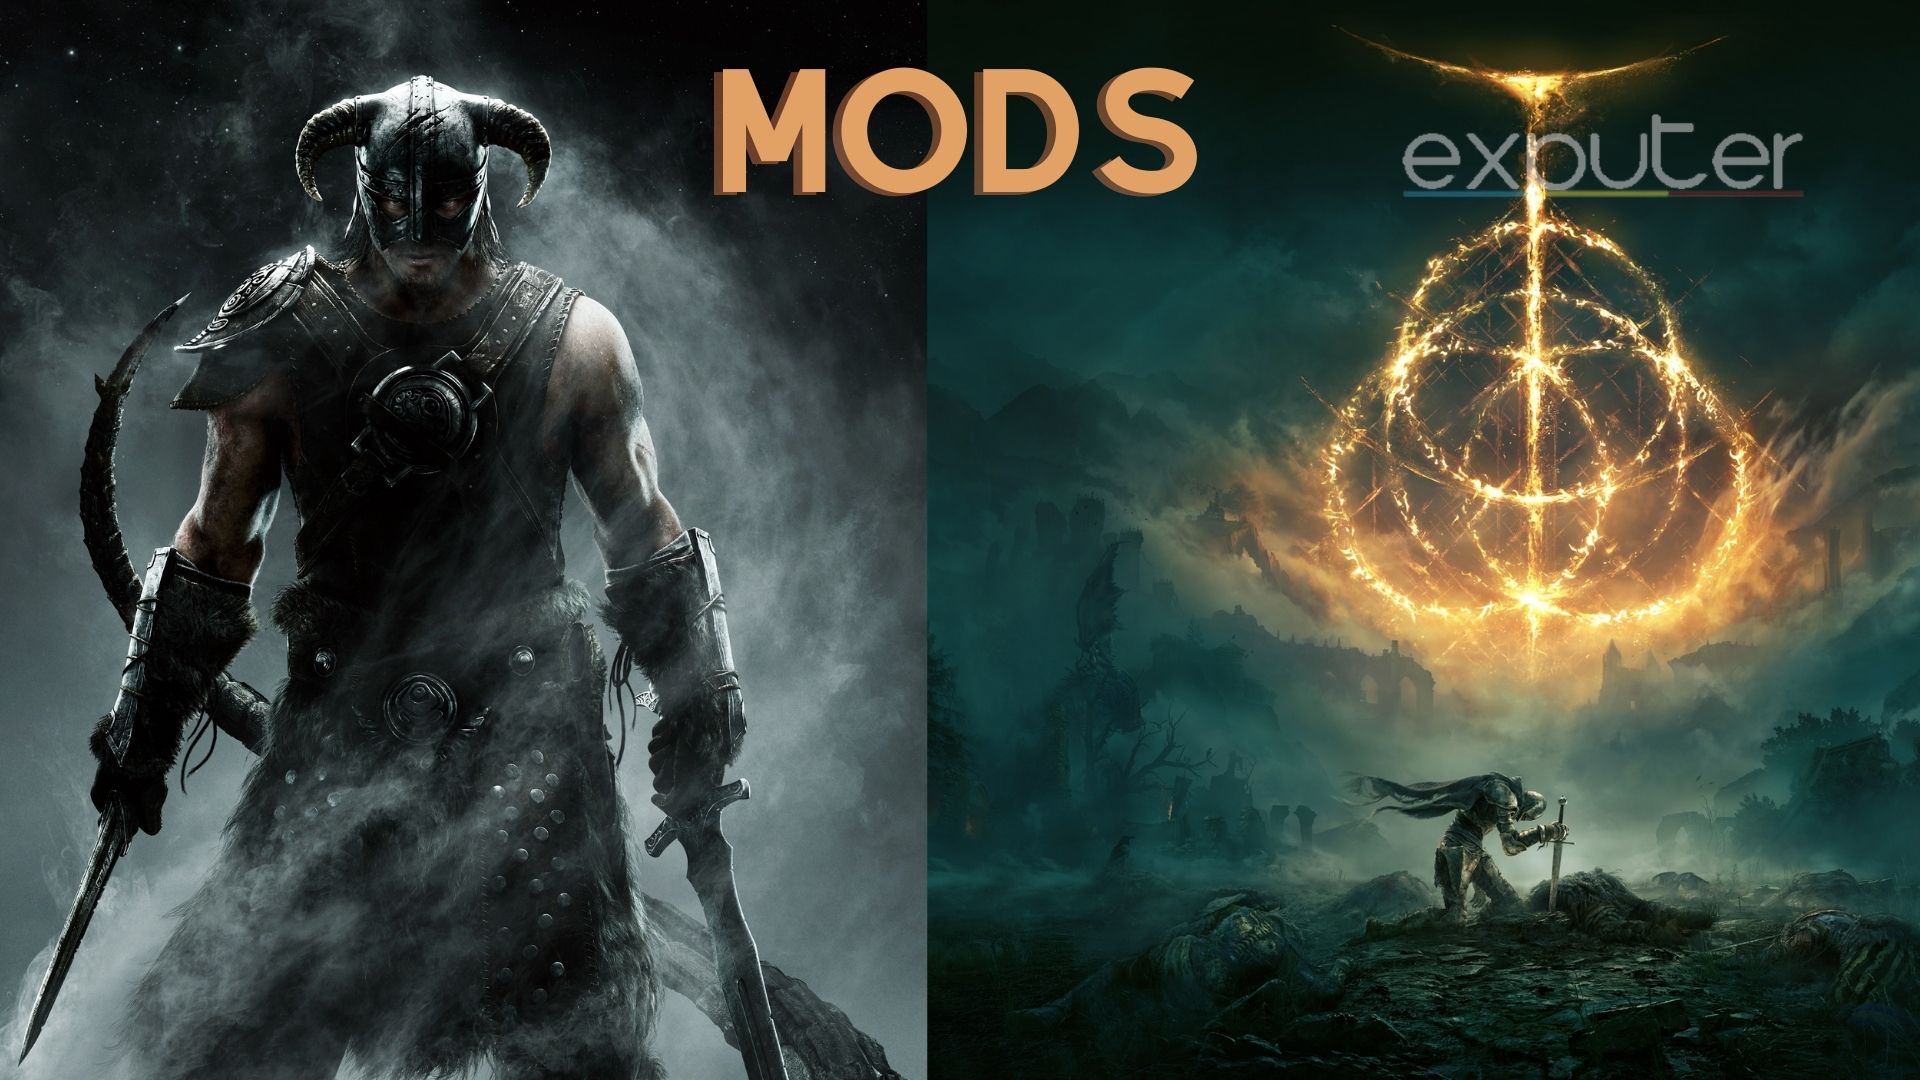 Mods of both games.